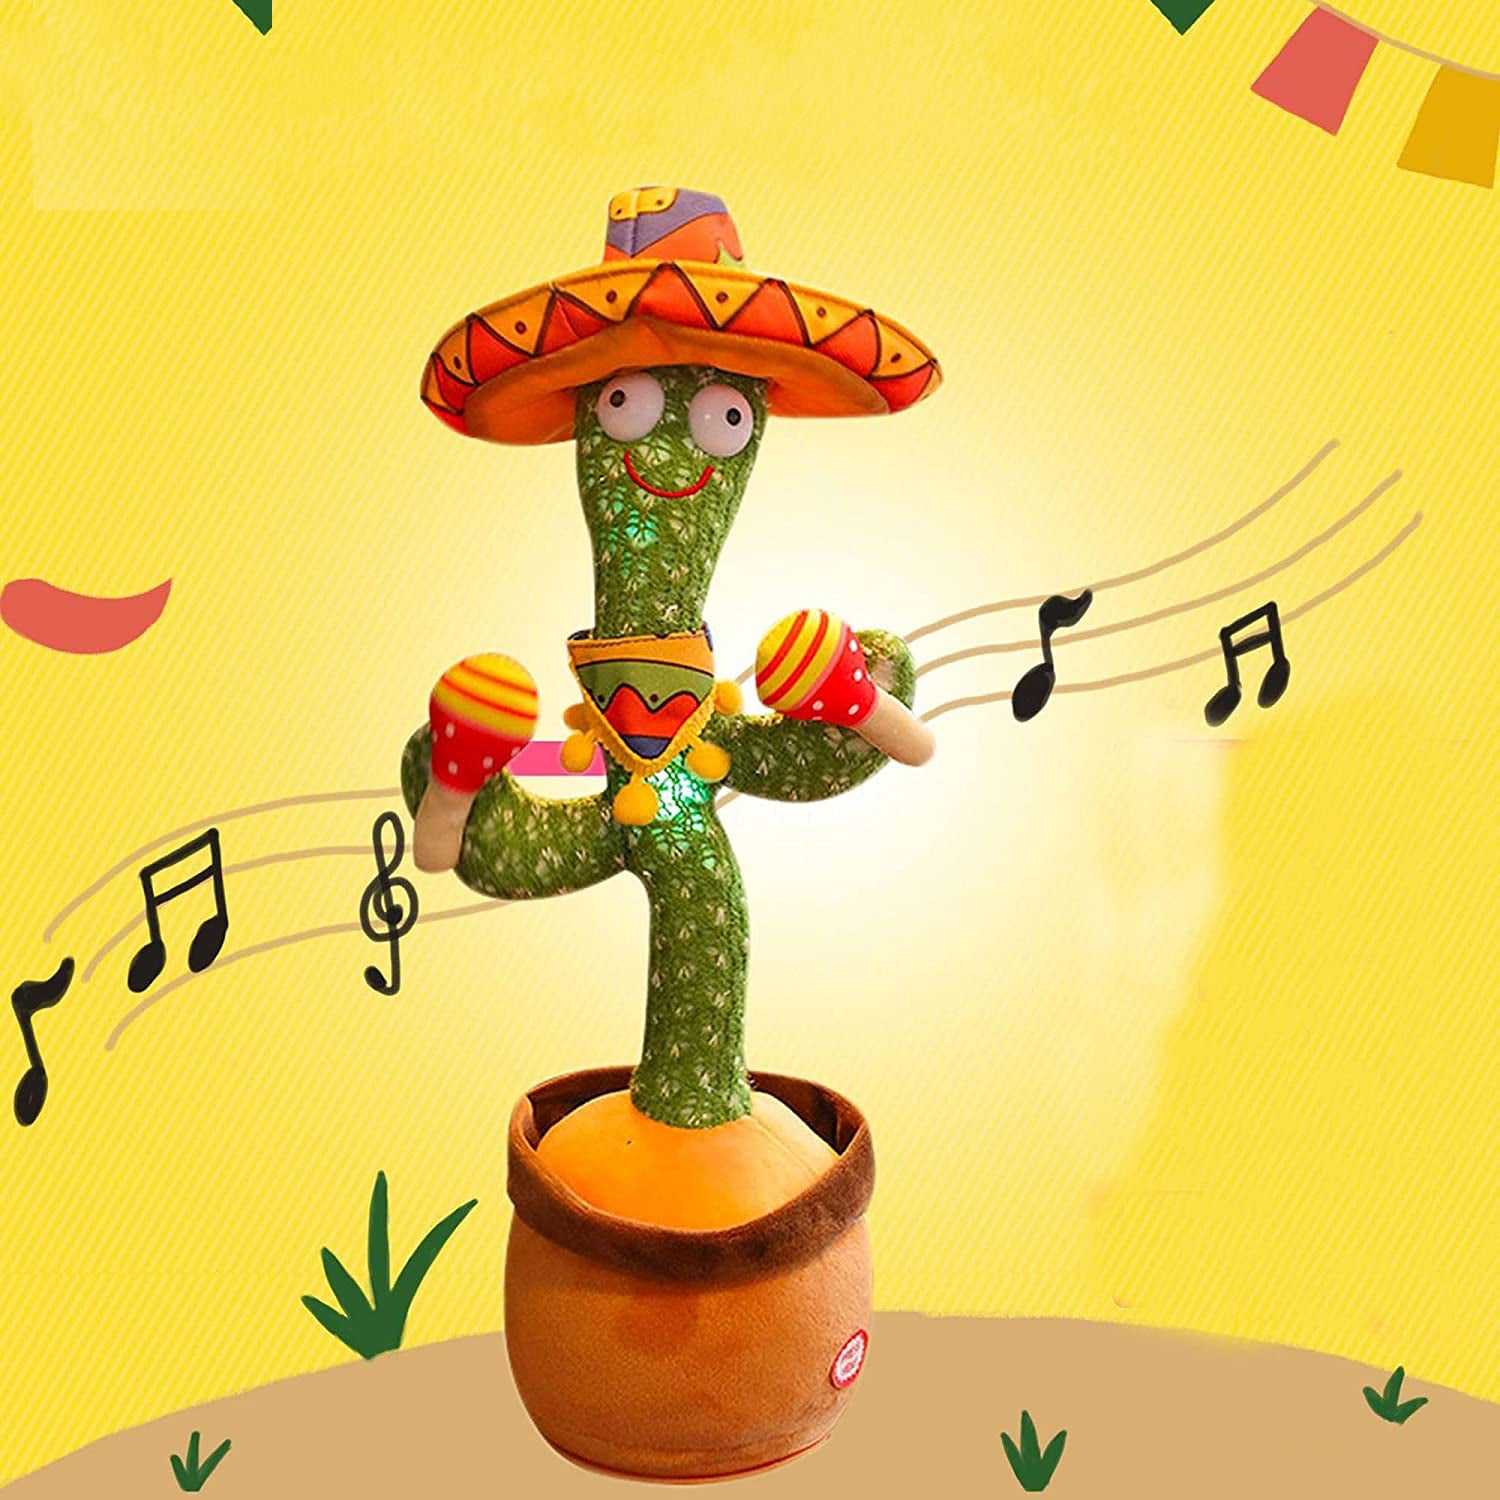 Mexican Themed Dancing Cactus Toy for Entertaining Cats that dance and mimics any voice